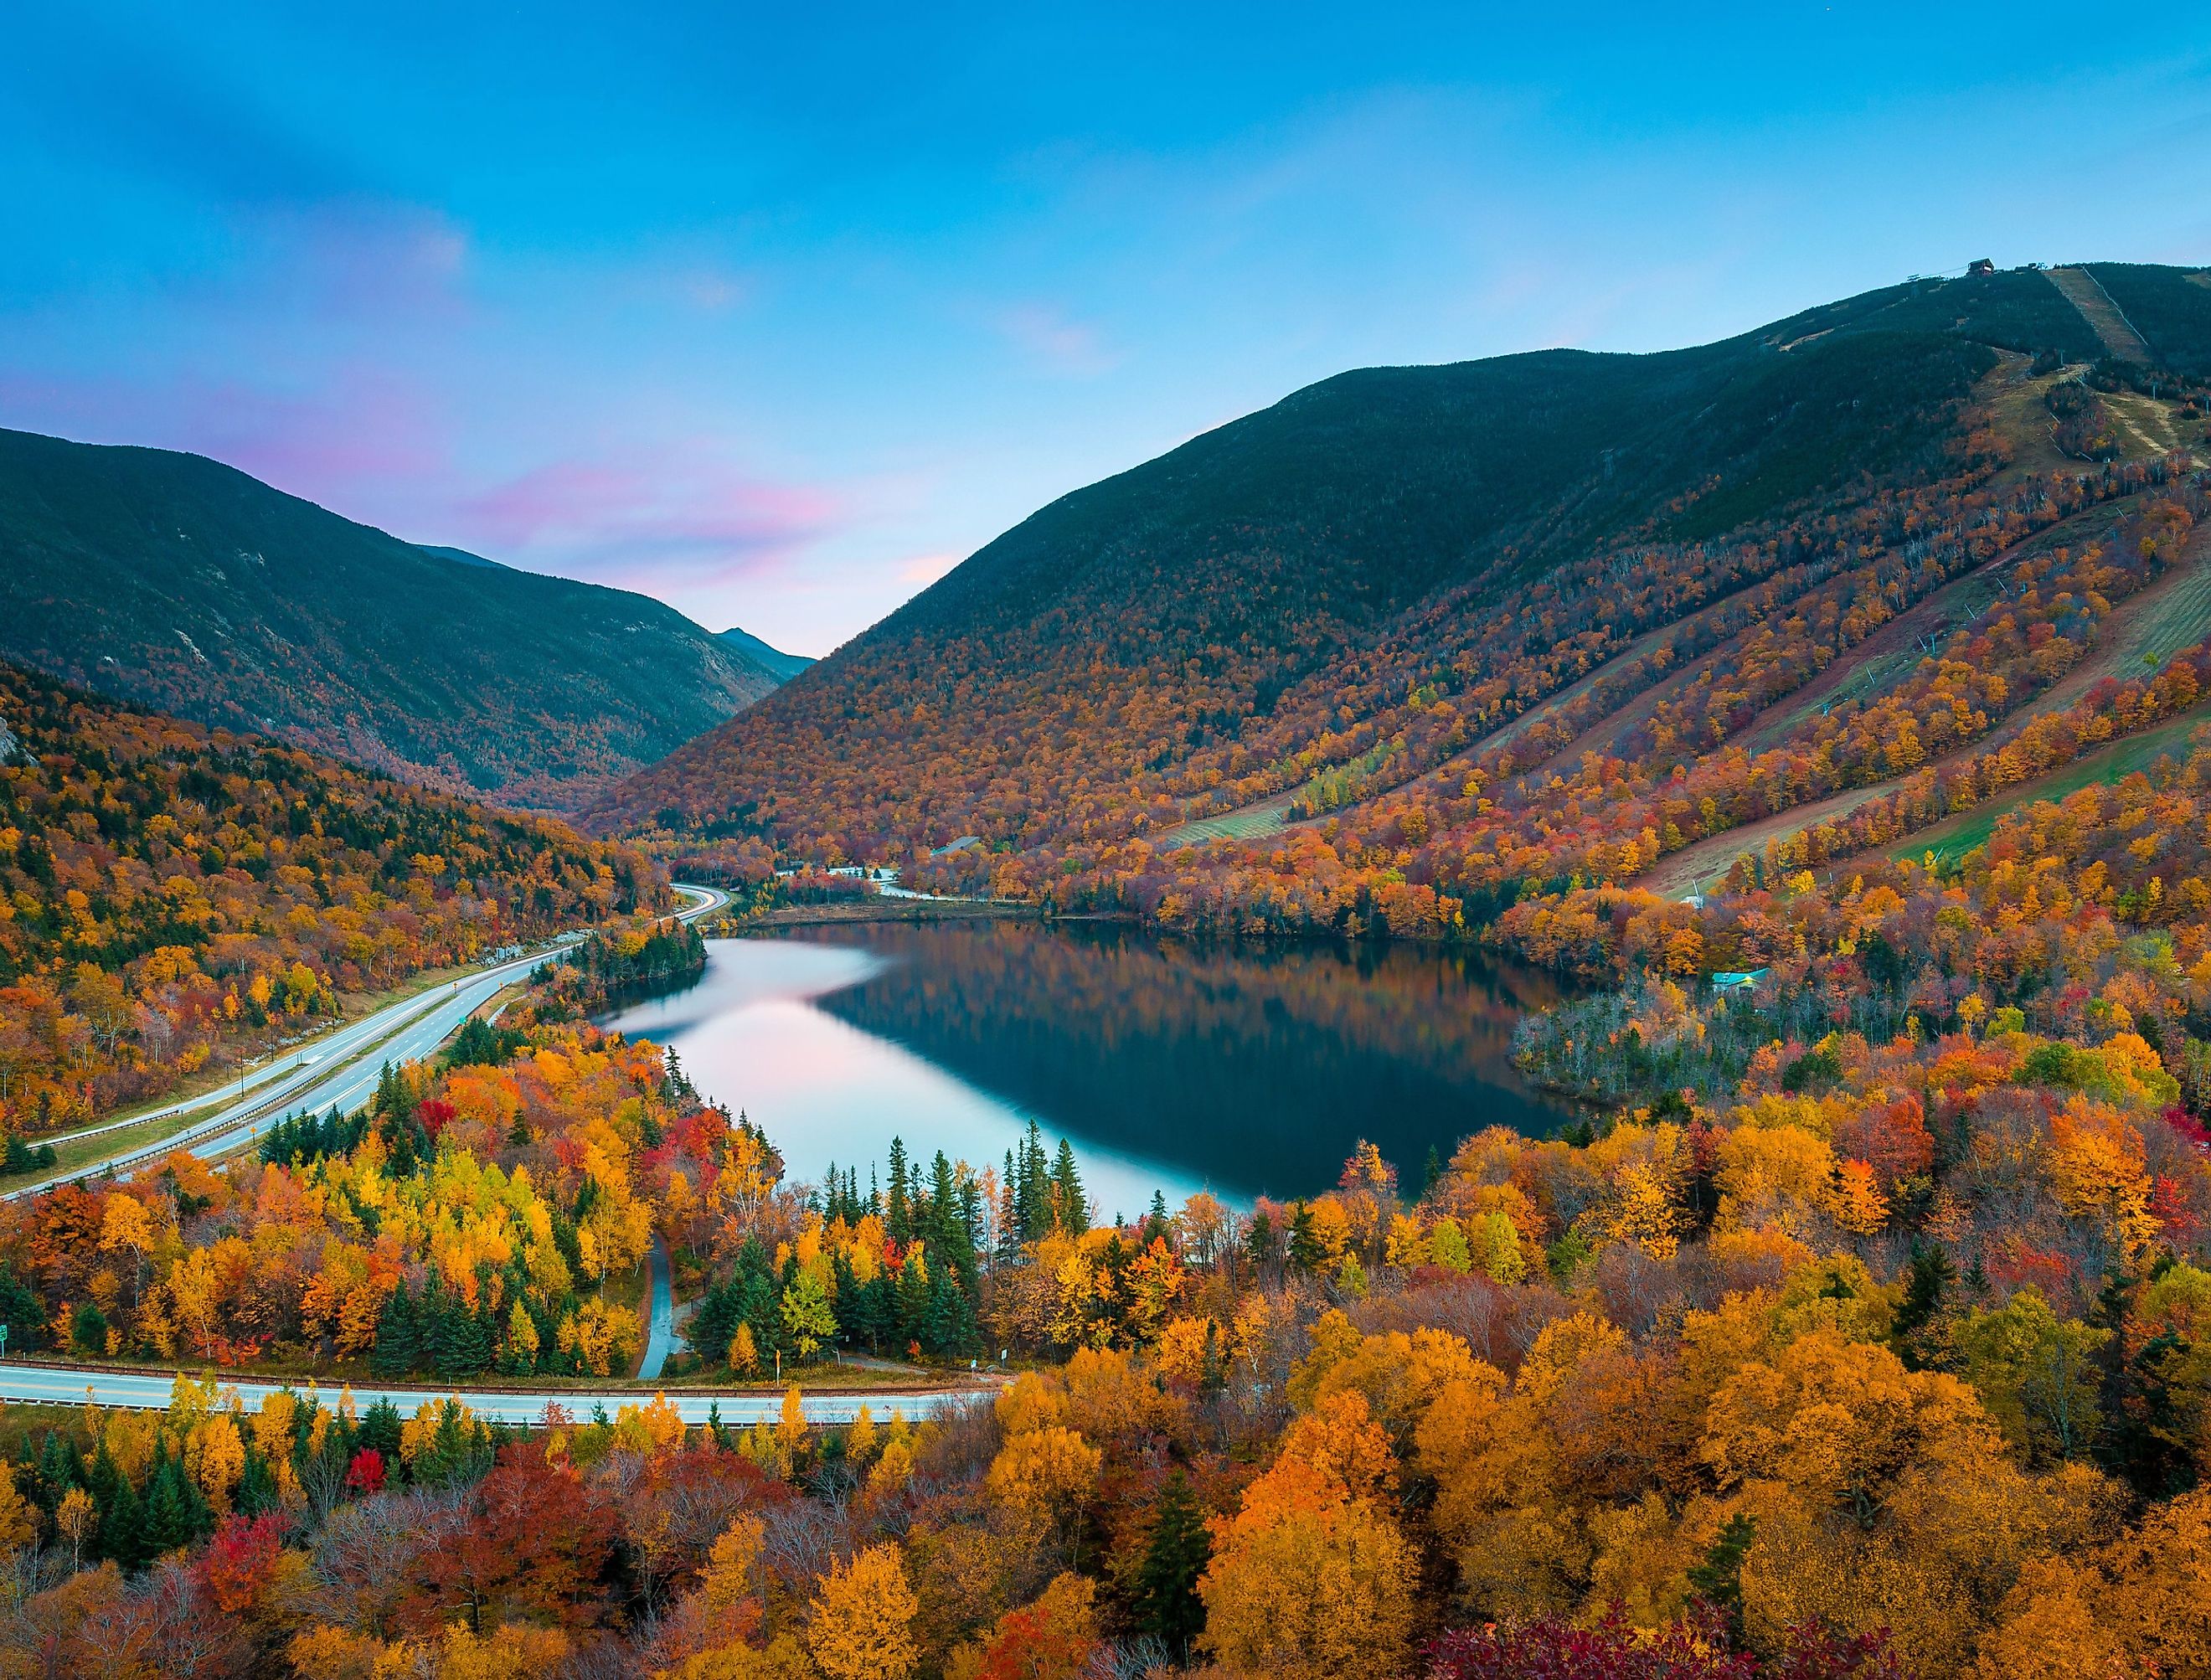 Franconia Notch State Park | White Mountain National Forest, New Hampshire Image credit: Winston Tan via shutterstock